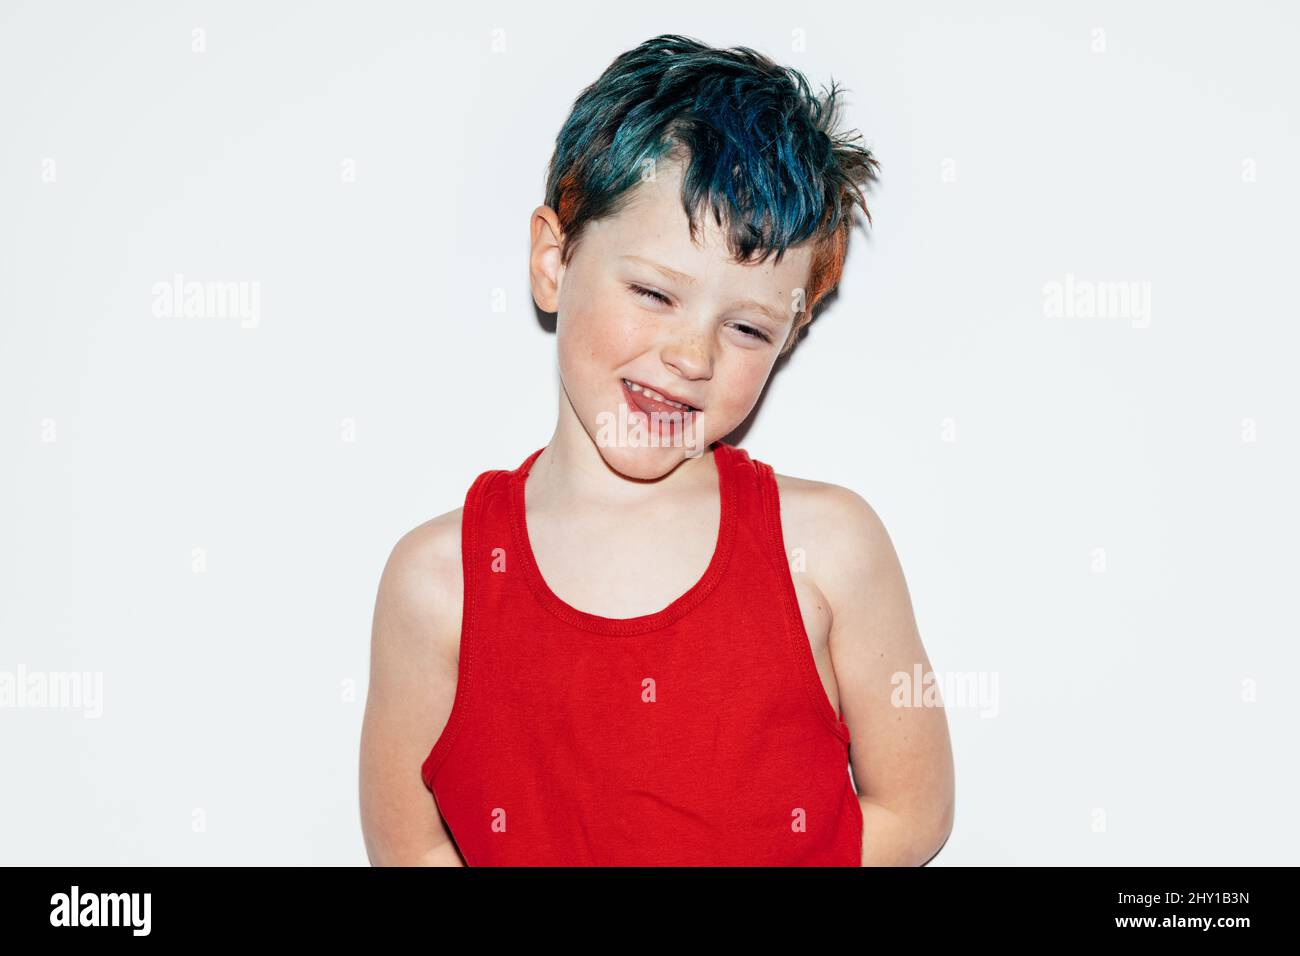 Mischievous boy with colorful dyed hair grinning and showing teeth while looking away on white background in light room Stock Photo